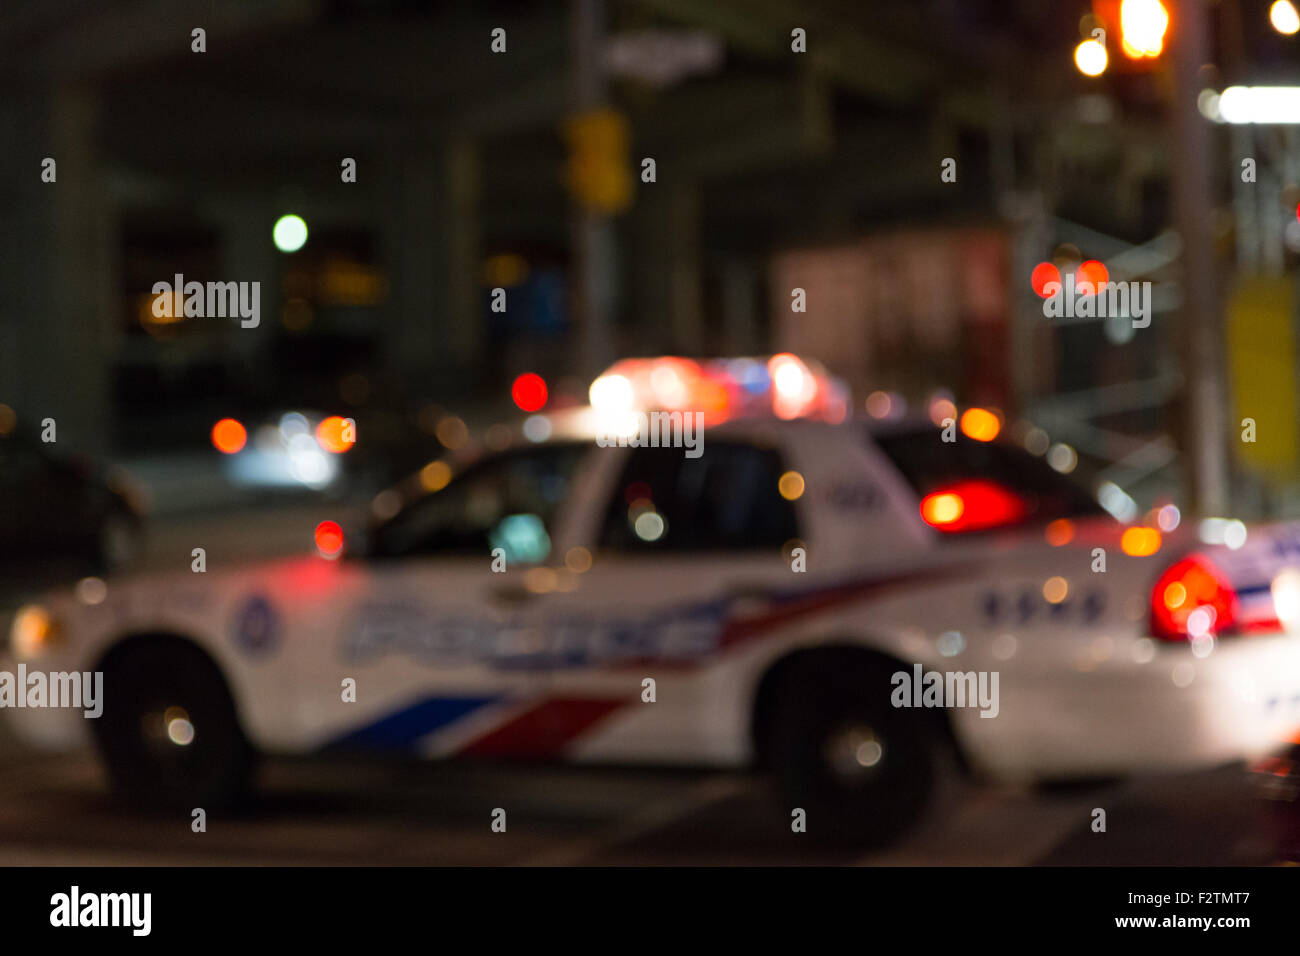 Defocussed Toronto Police Car parked on a street at night with it's lights on. Stock Photo